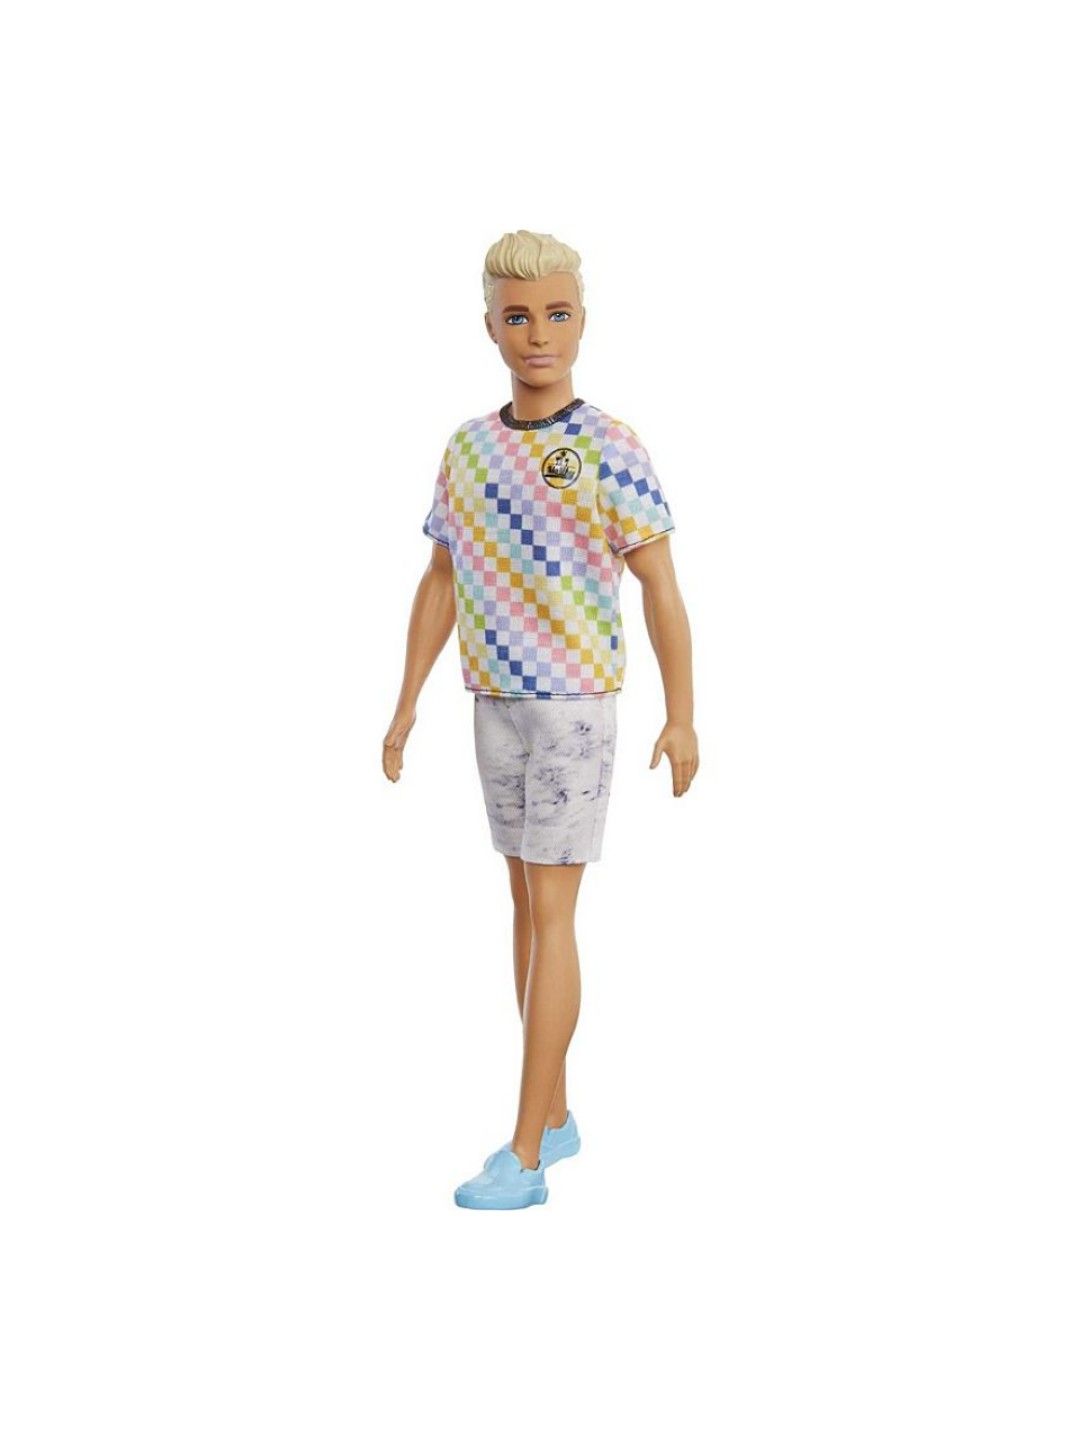 Barbie Barbie Ken Fashionistas Doll #174 With Checkered Surf-Inspired ...